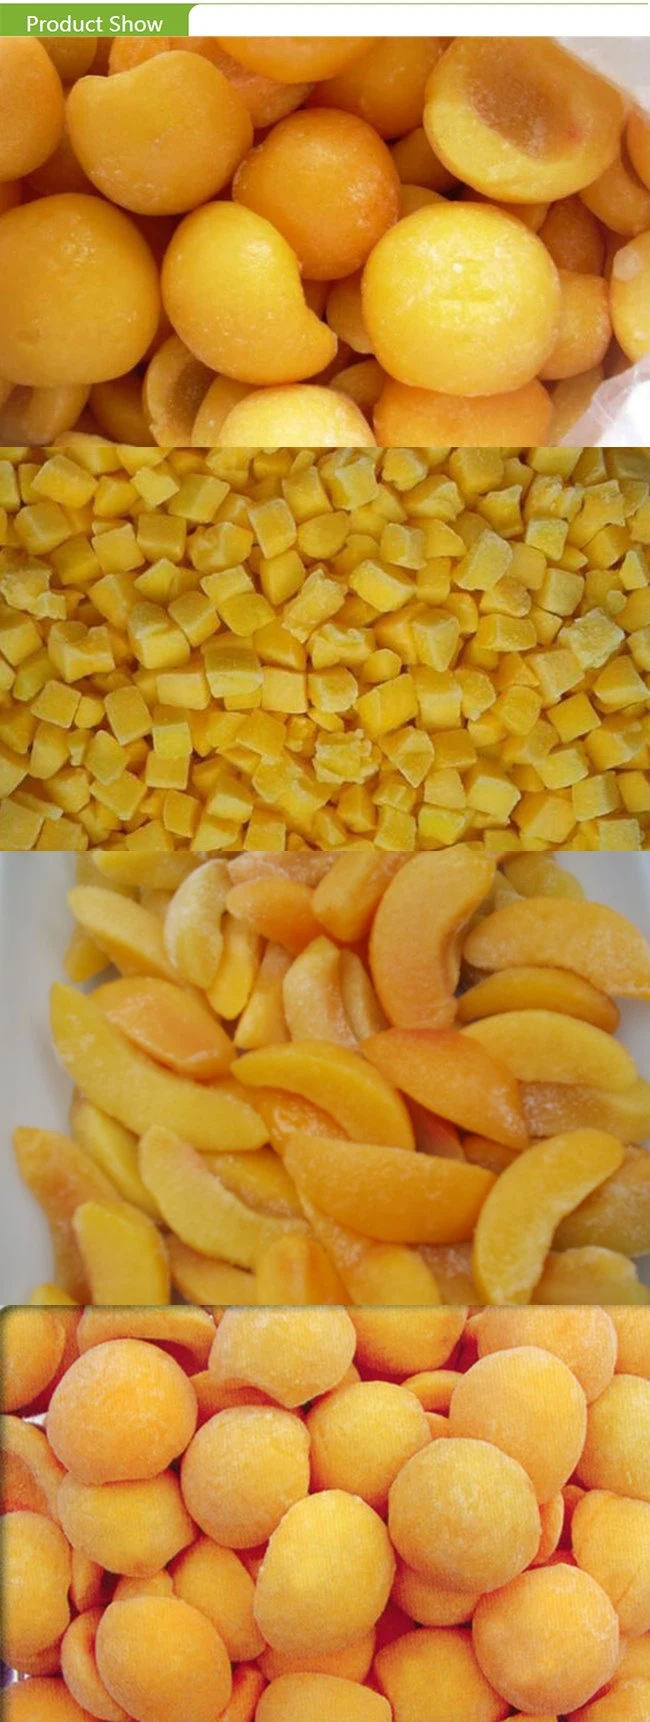 Top Quality Frozen Yellow Peach Slices